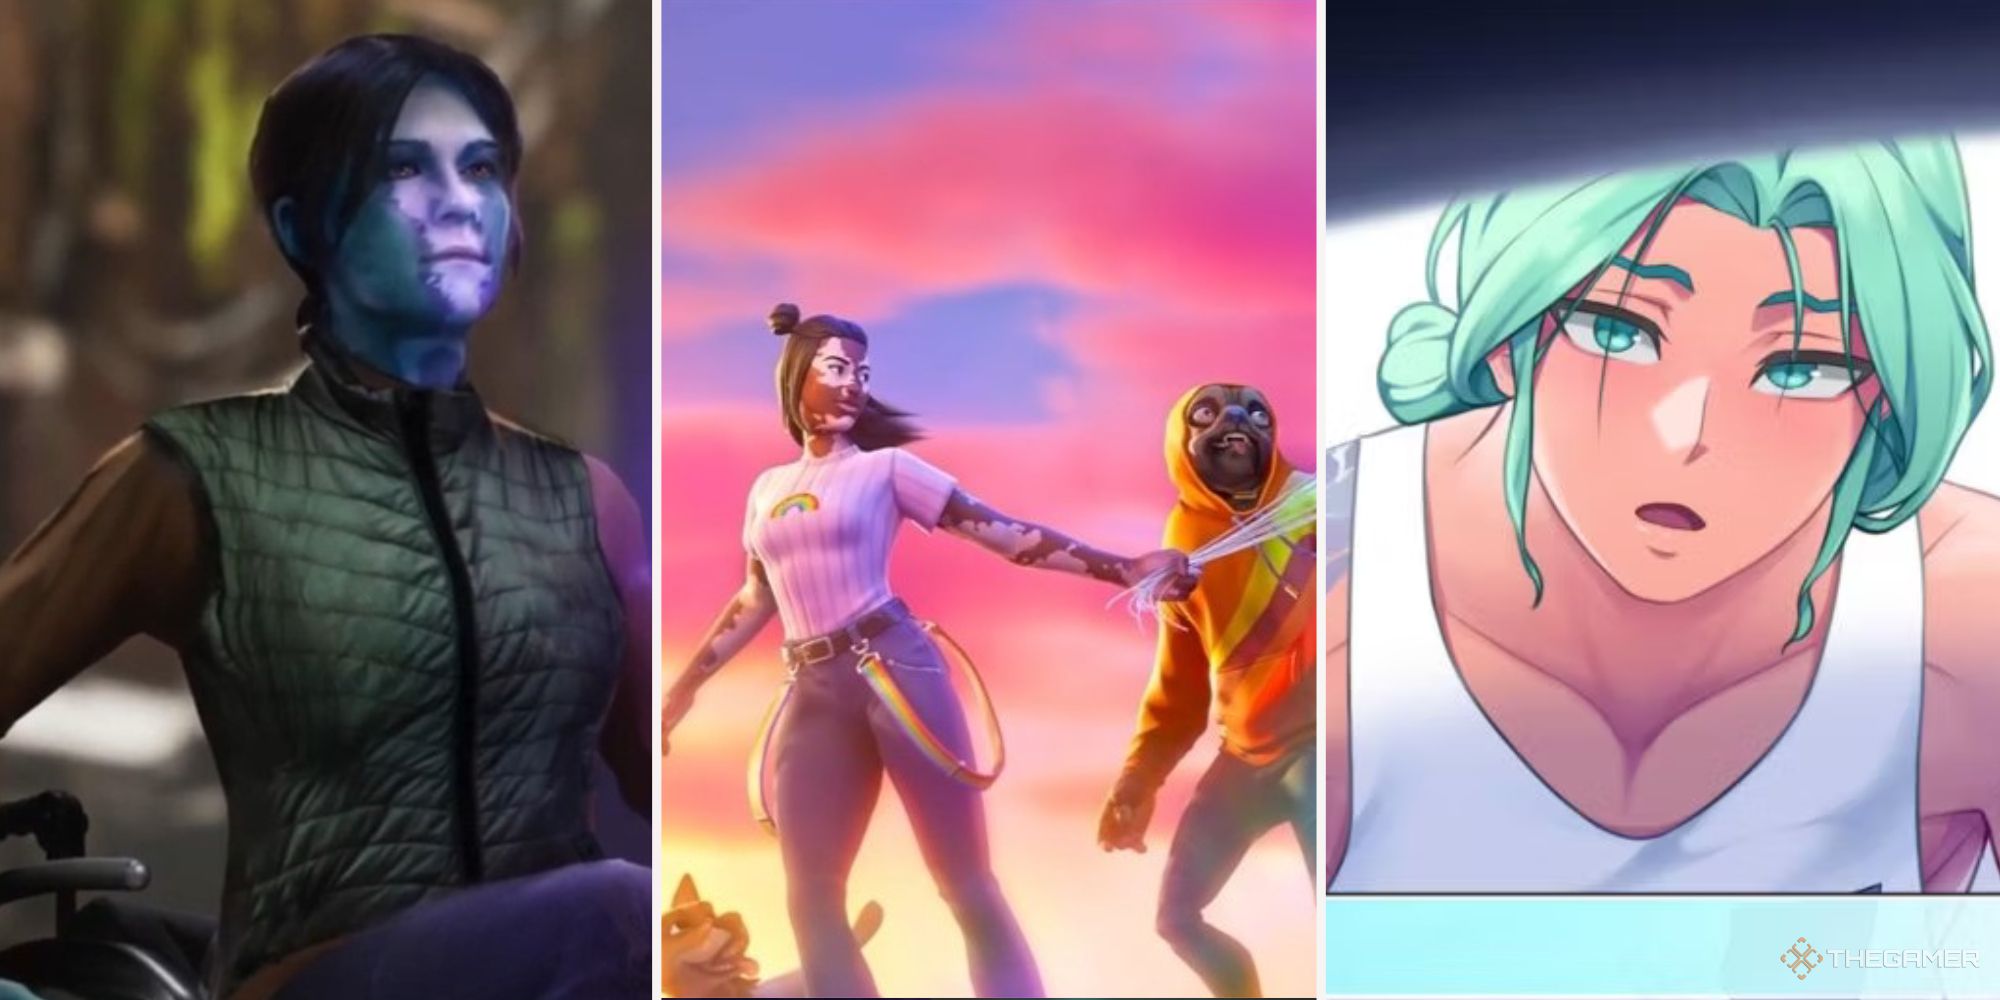 Featured image of Cerise from Marvel's Avengers, Joy from Fortnite, and Cove Holden from Our Life Beginnings and Always